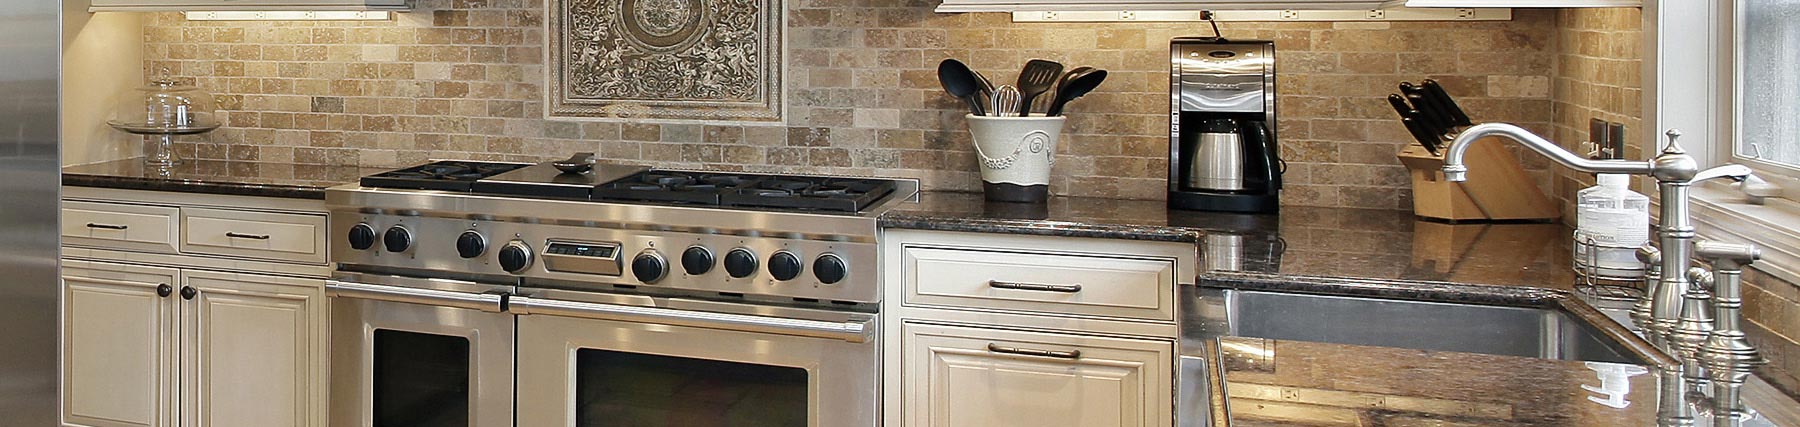 Saint Louis Countertops : Licensed, Bonded and Insured